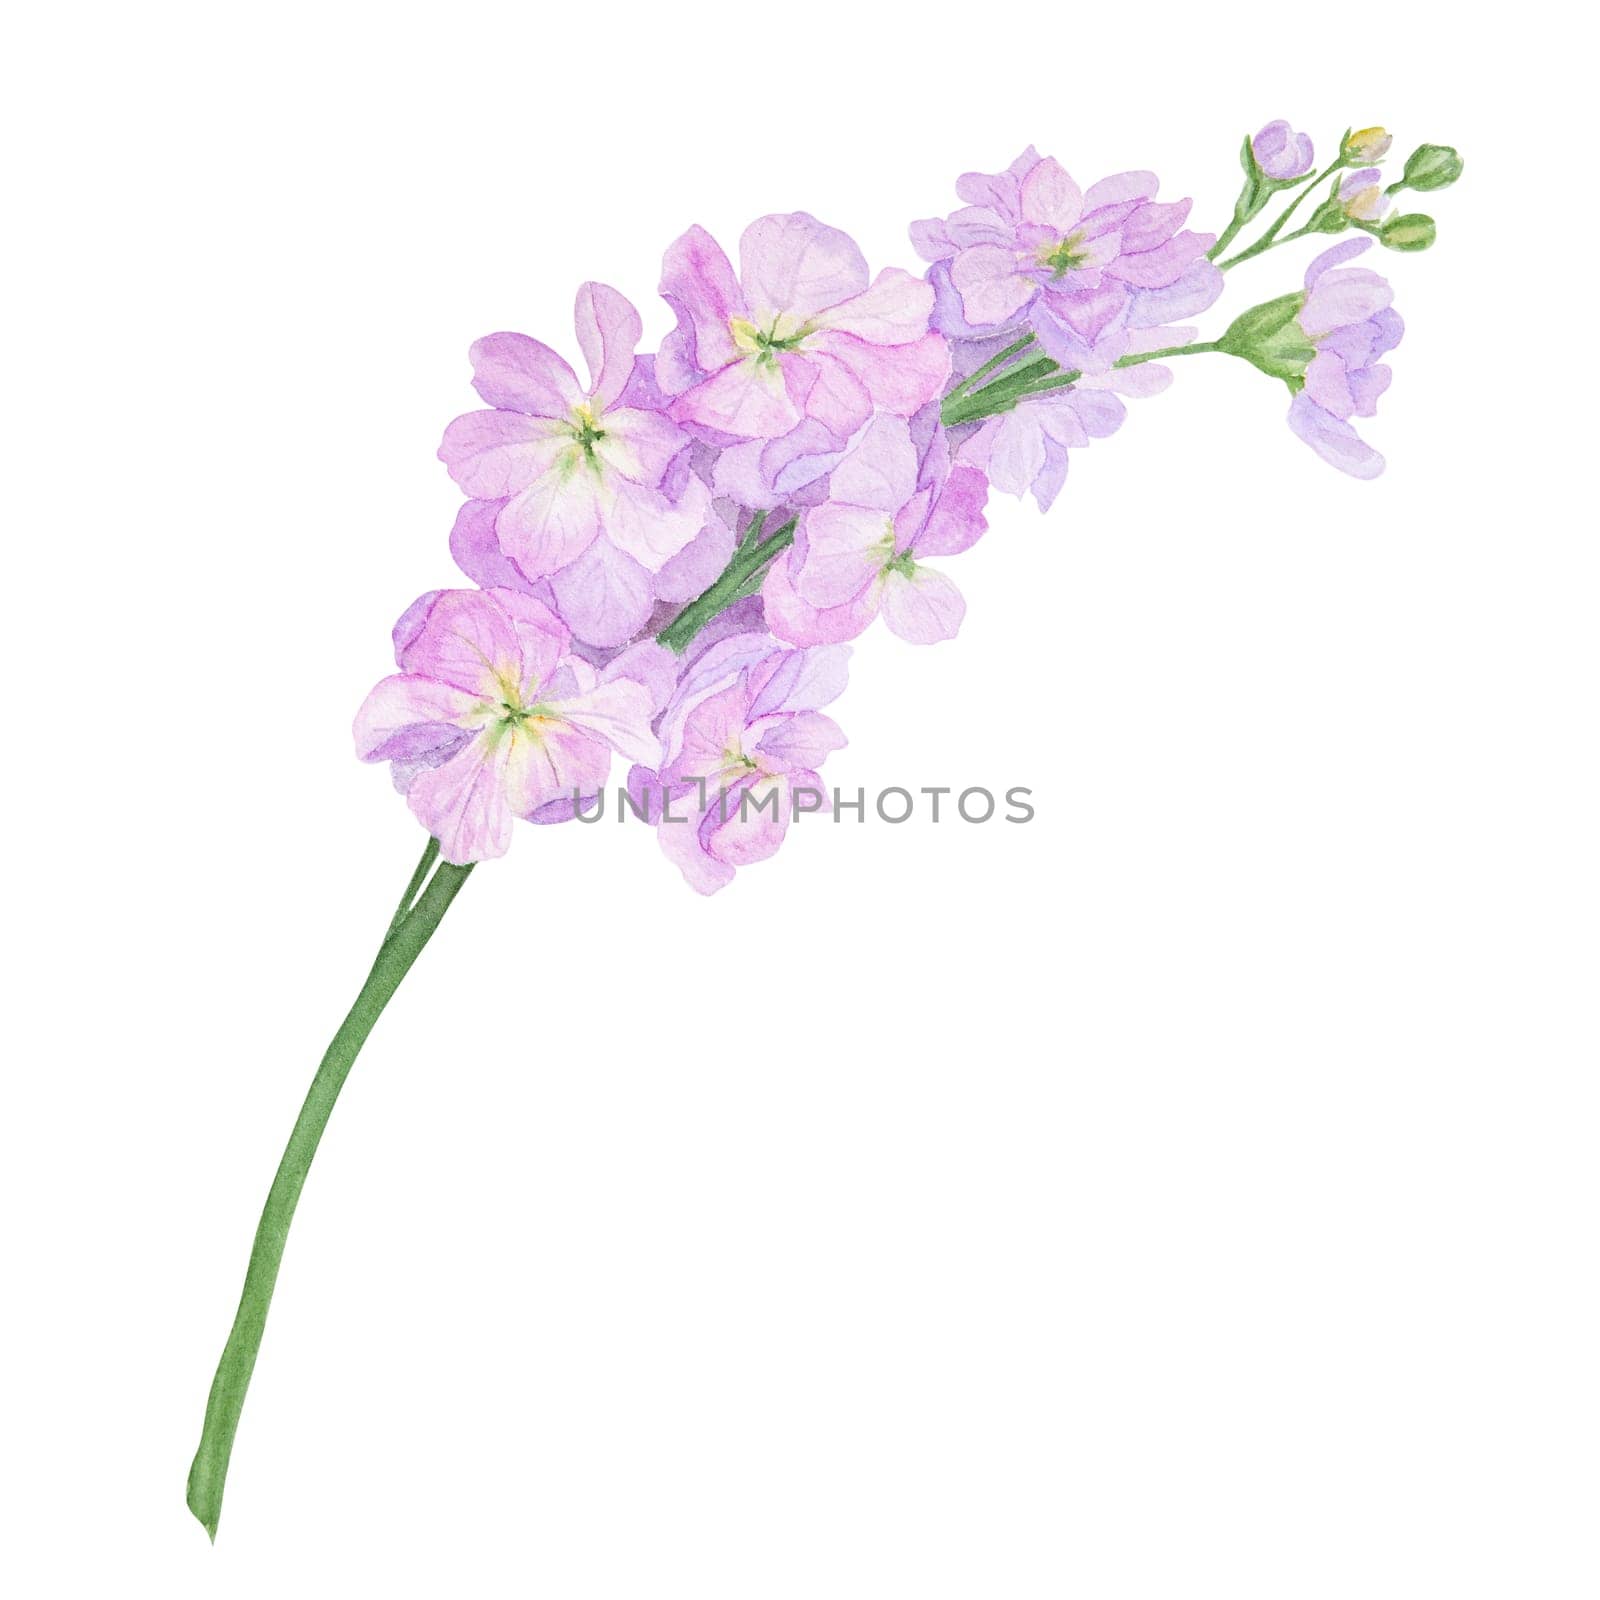 Garden lilac stock, violet gillyflower watercolor illustration. Hand drawn botanical painting, floral sketch. Colorful sweet pea flower clipart for summer or autumn design of wedding invitation, prints, greetings, sublimation, textile